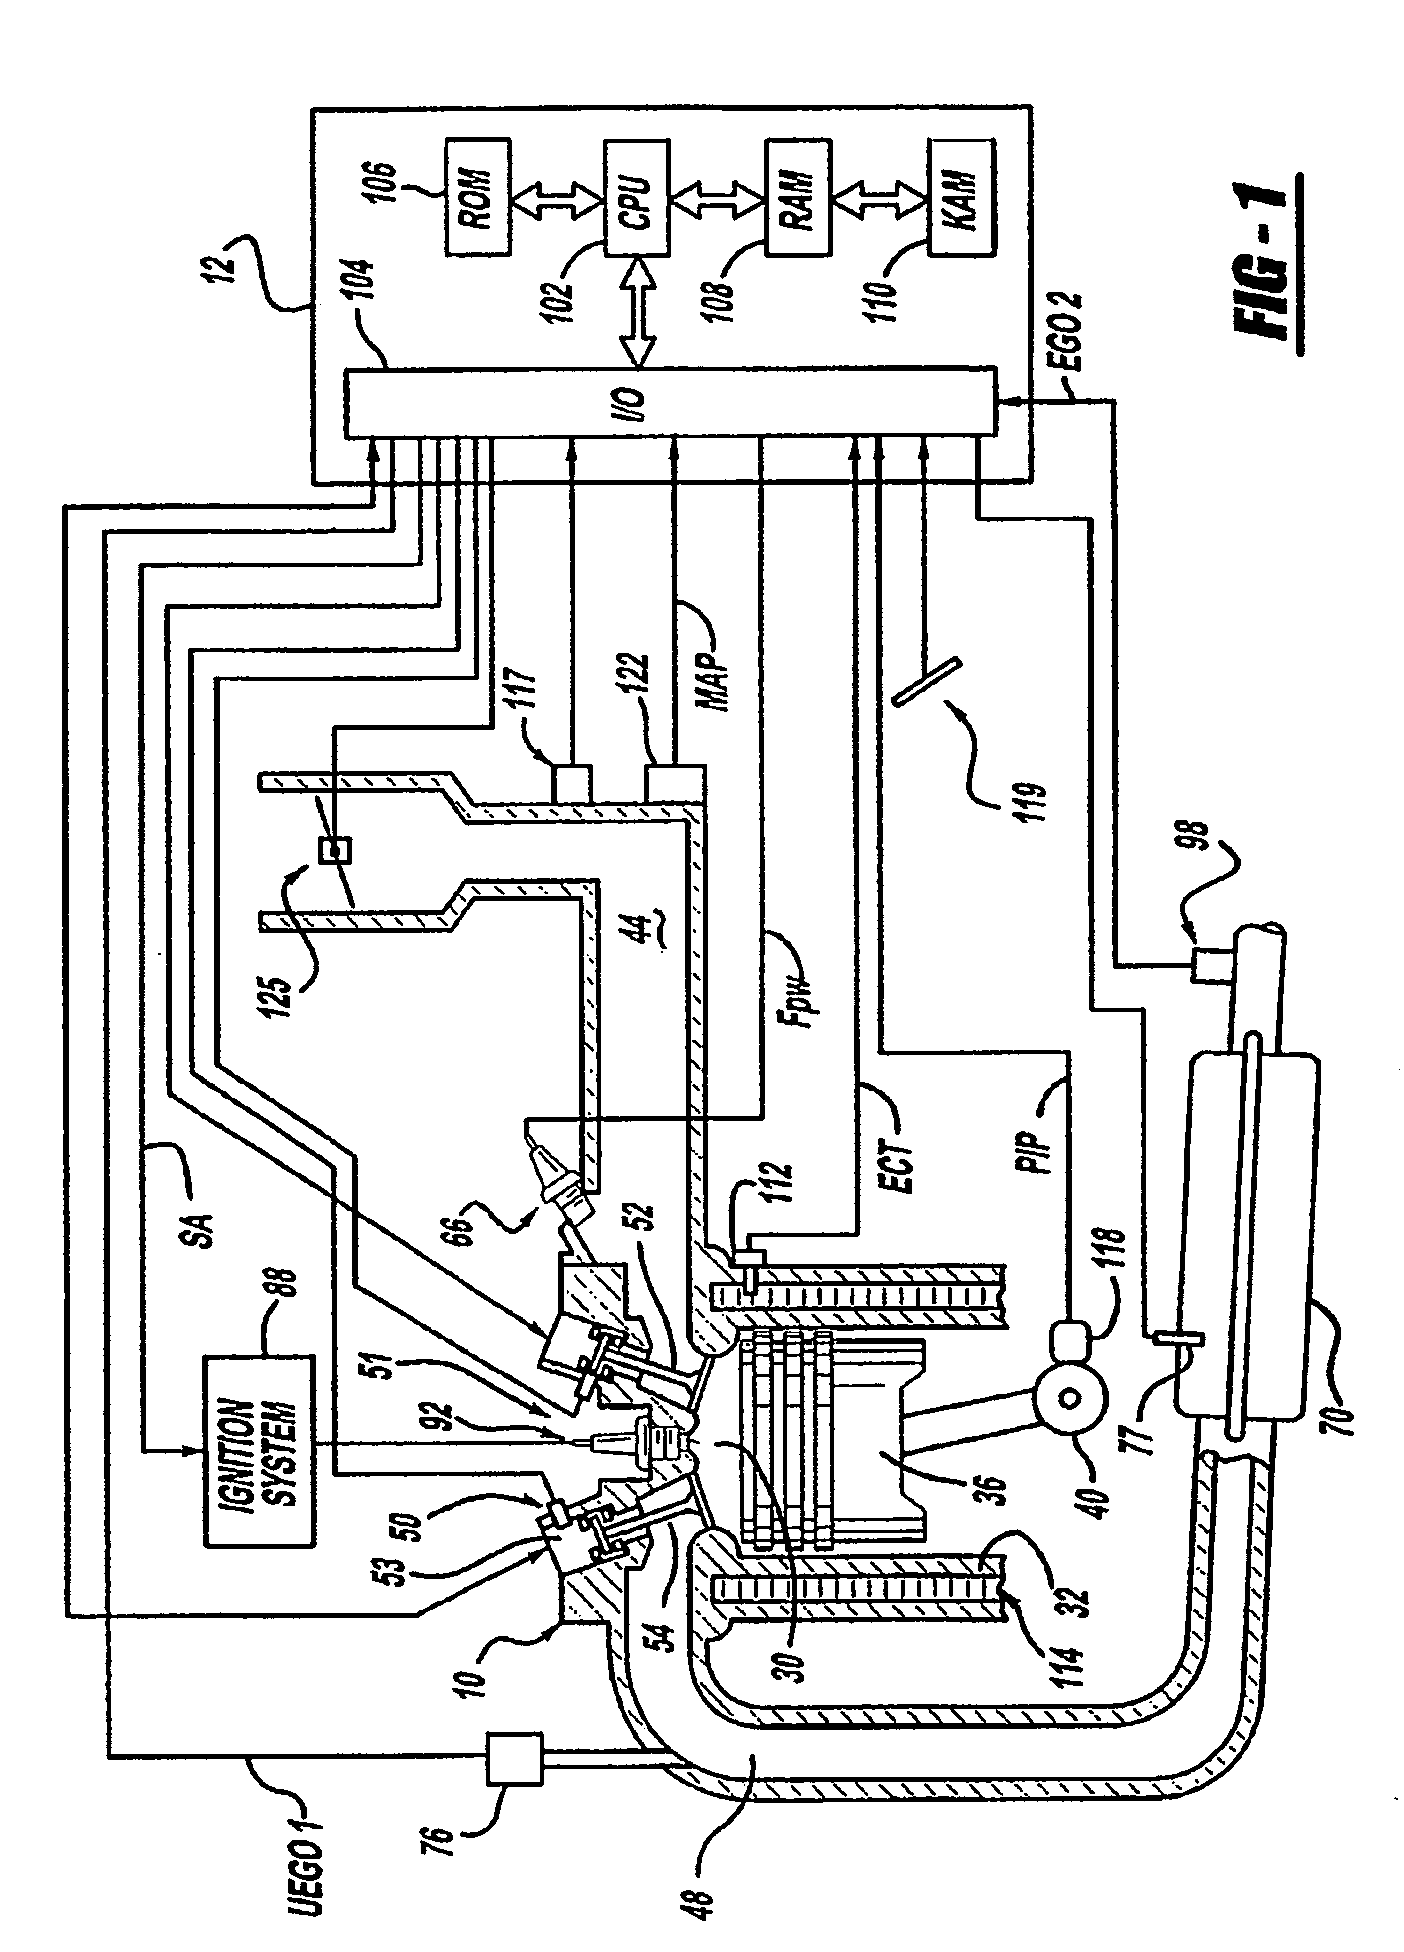 System and method for exhaust heat generation using electrically actuated cylinder valves